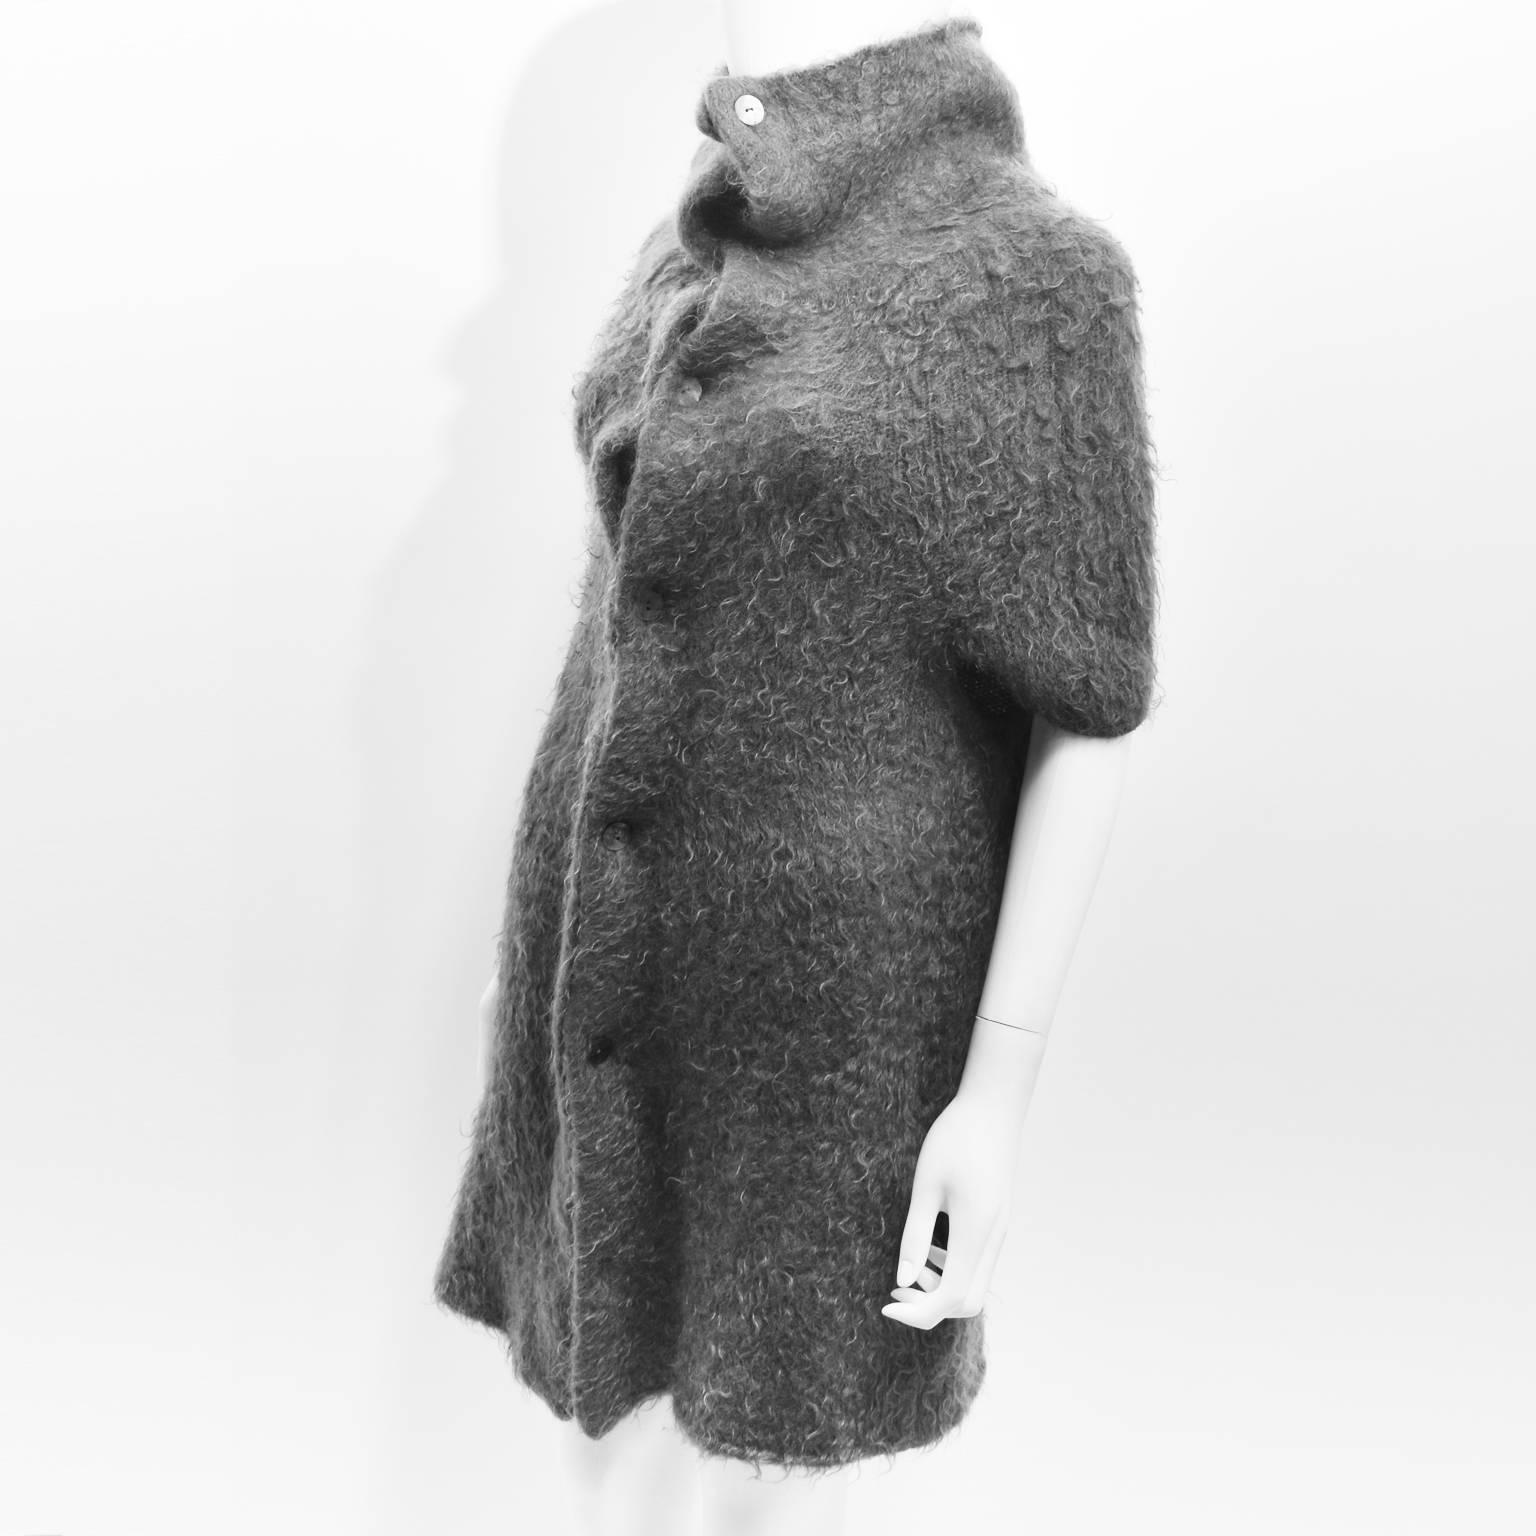 A grey Mohair (80%) knit by Maison Martin Margiela featuring a buttoned front, round short raglan sleeves (seams are concealed), a turtleneck and two side pockets. Size S.